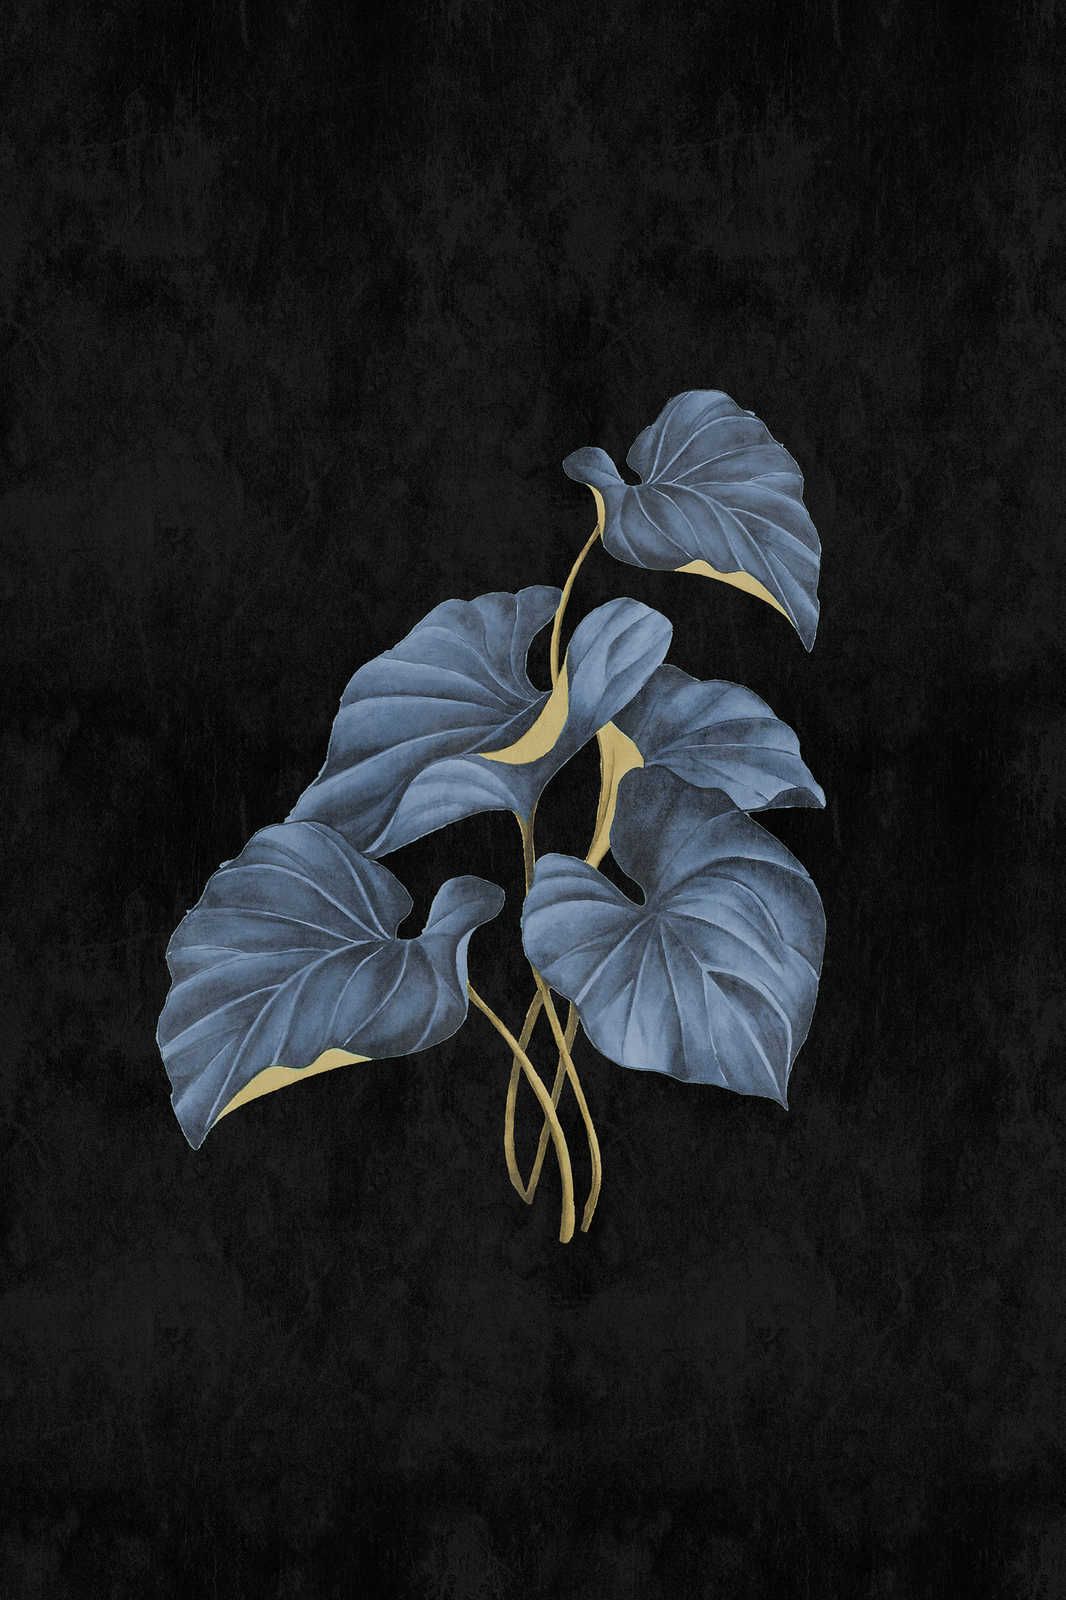             Fiji 1 - Black Canvas Painting Blue Leaves with Gold Accent - 0.80 m x 1.20 m
        